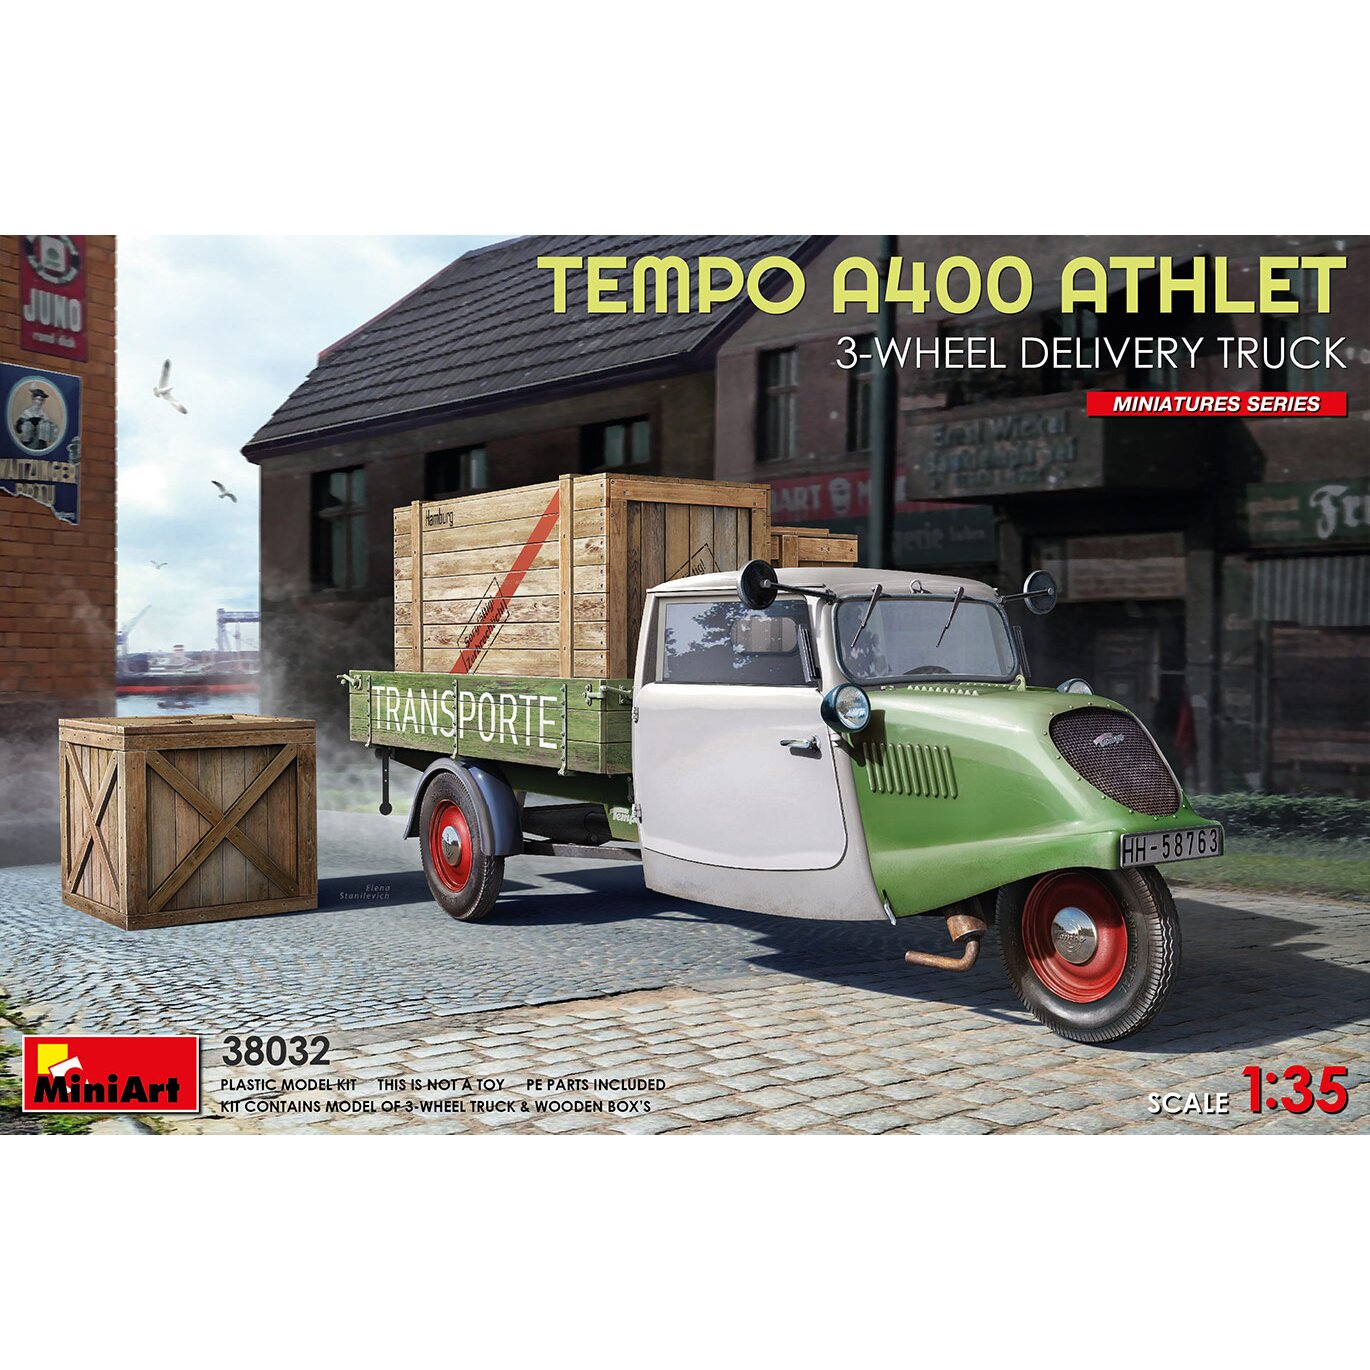 Miniart 38032 Tempo A 400 Athlet 3-Wheel Delivery Truck 1:35 Scale Model Kit